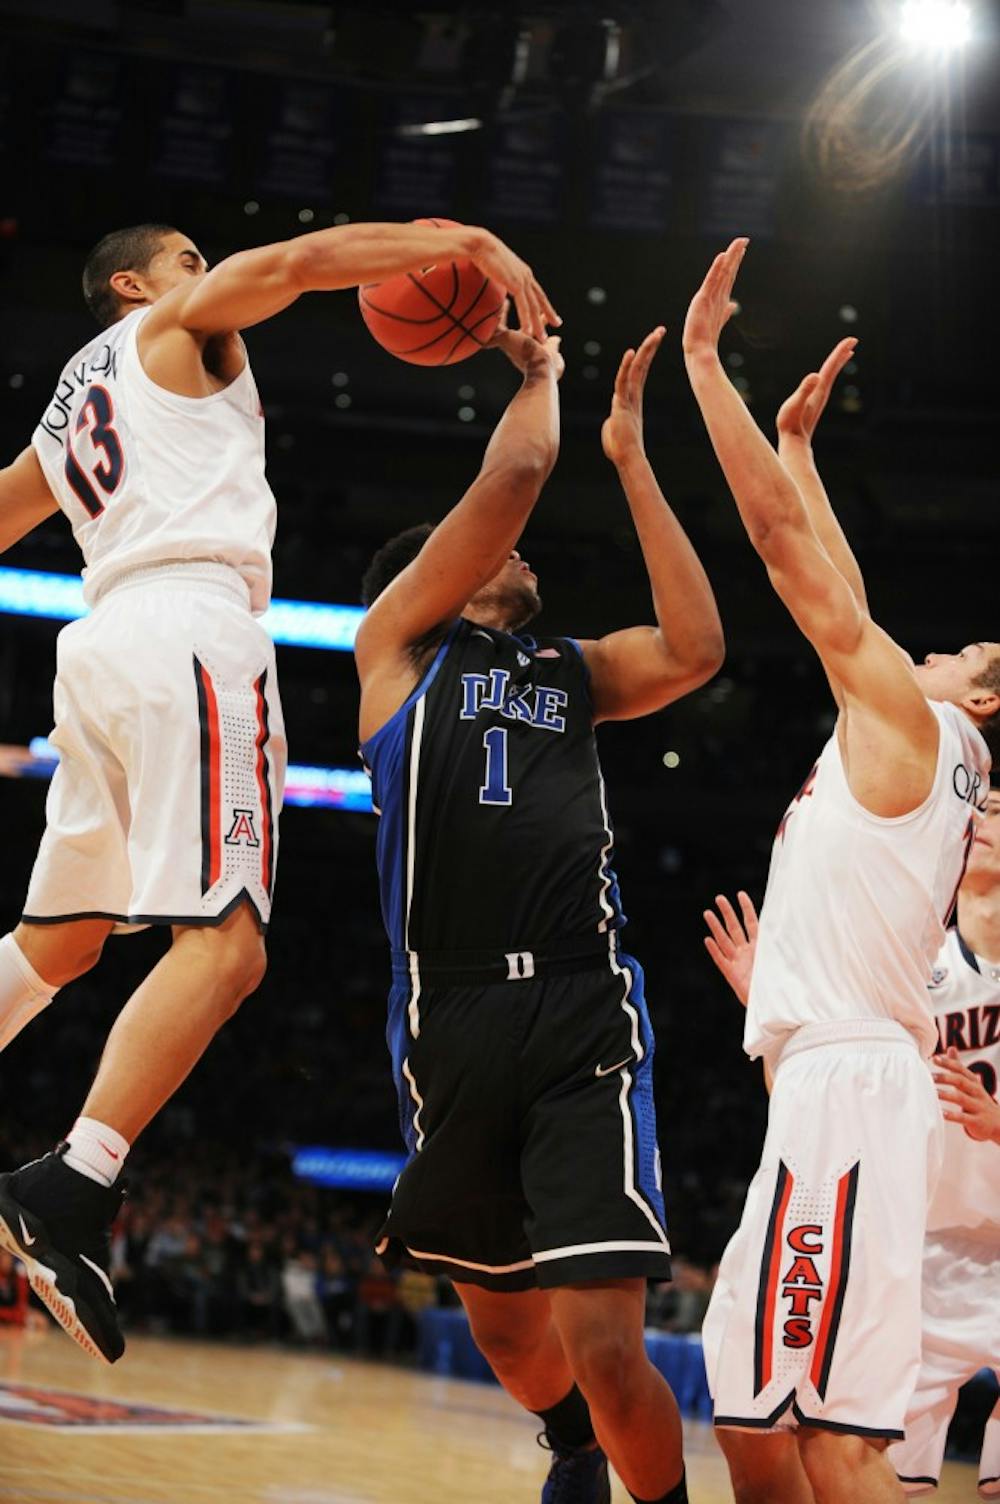 On a night that freshman Jabari Parker struggled, No. 6 Duke fell to the balanced attack of the No. 4 Wildcats, losing 72-66 in the championship game of the NIT Season Tip-Off at Madison Square Garden.